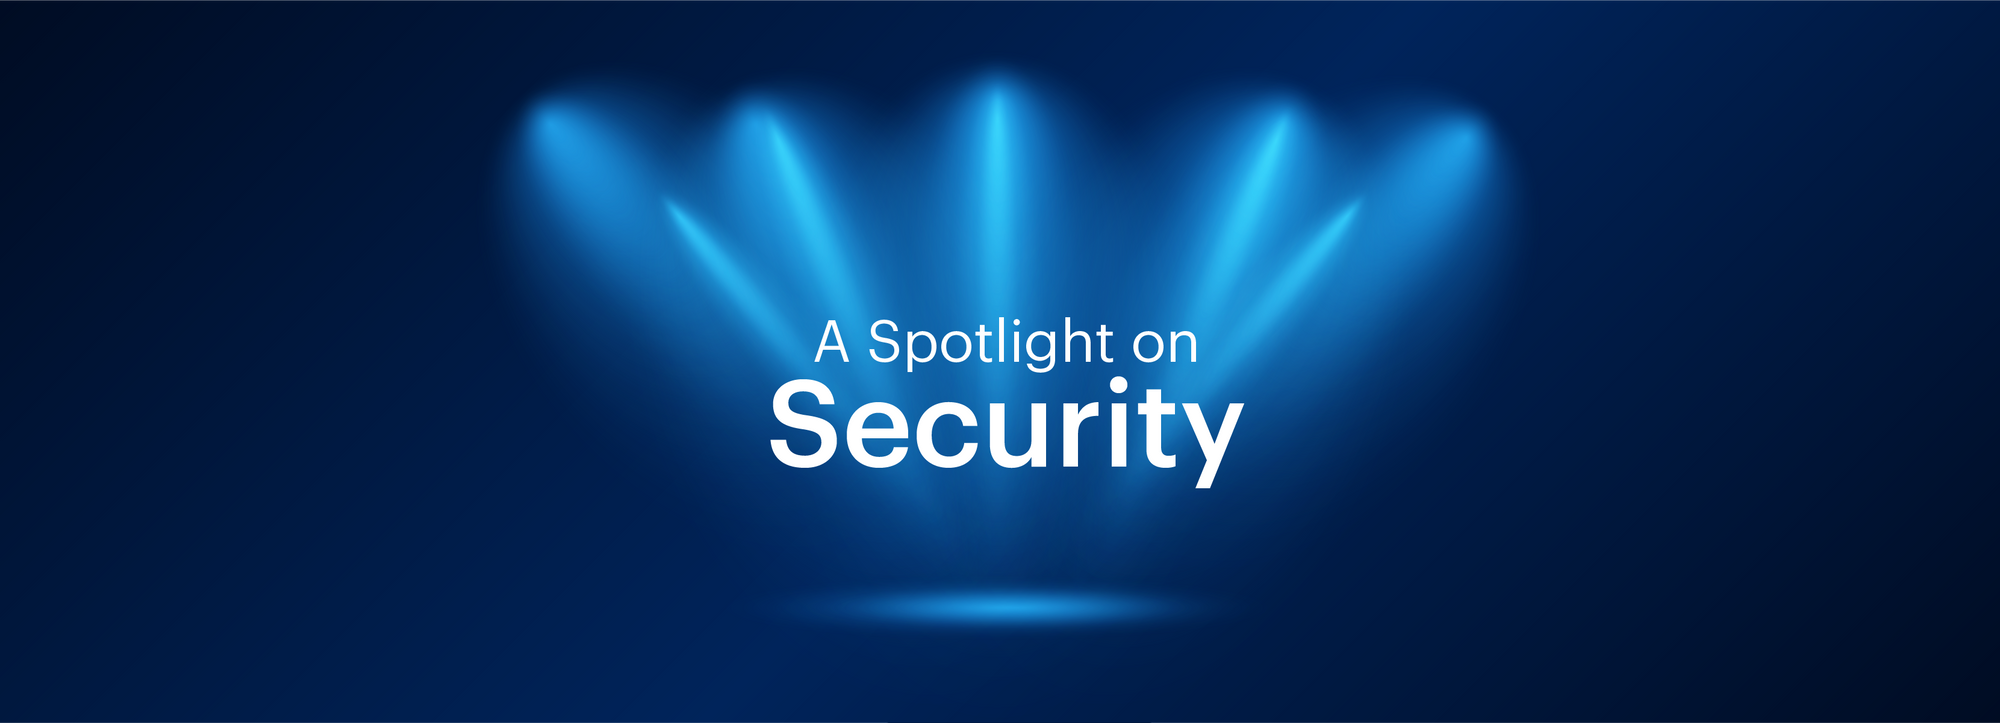 A Spotlight on Security: Tresorit’s must-read newsletter for IT
professionals